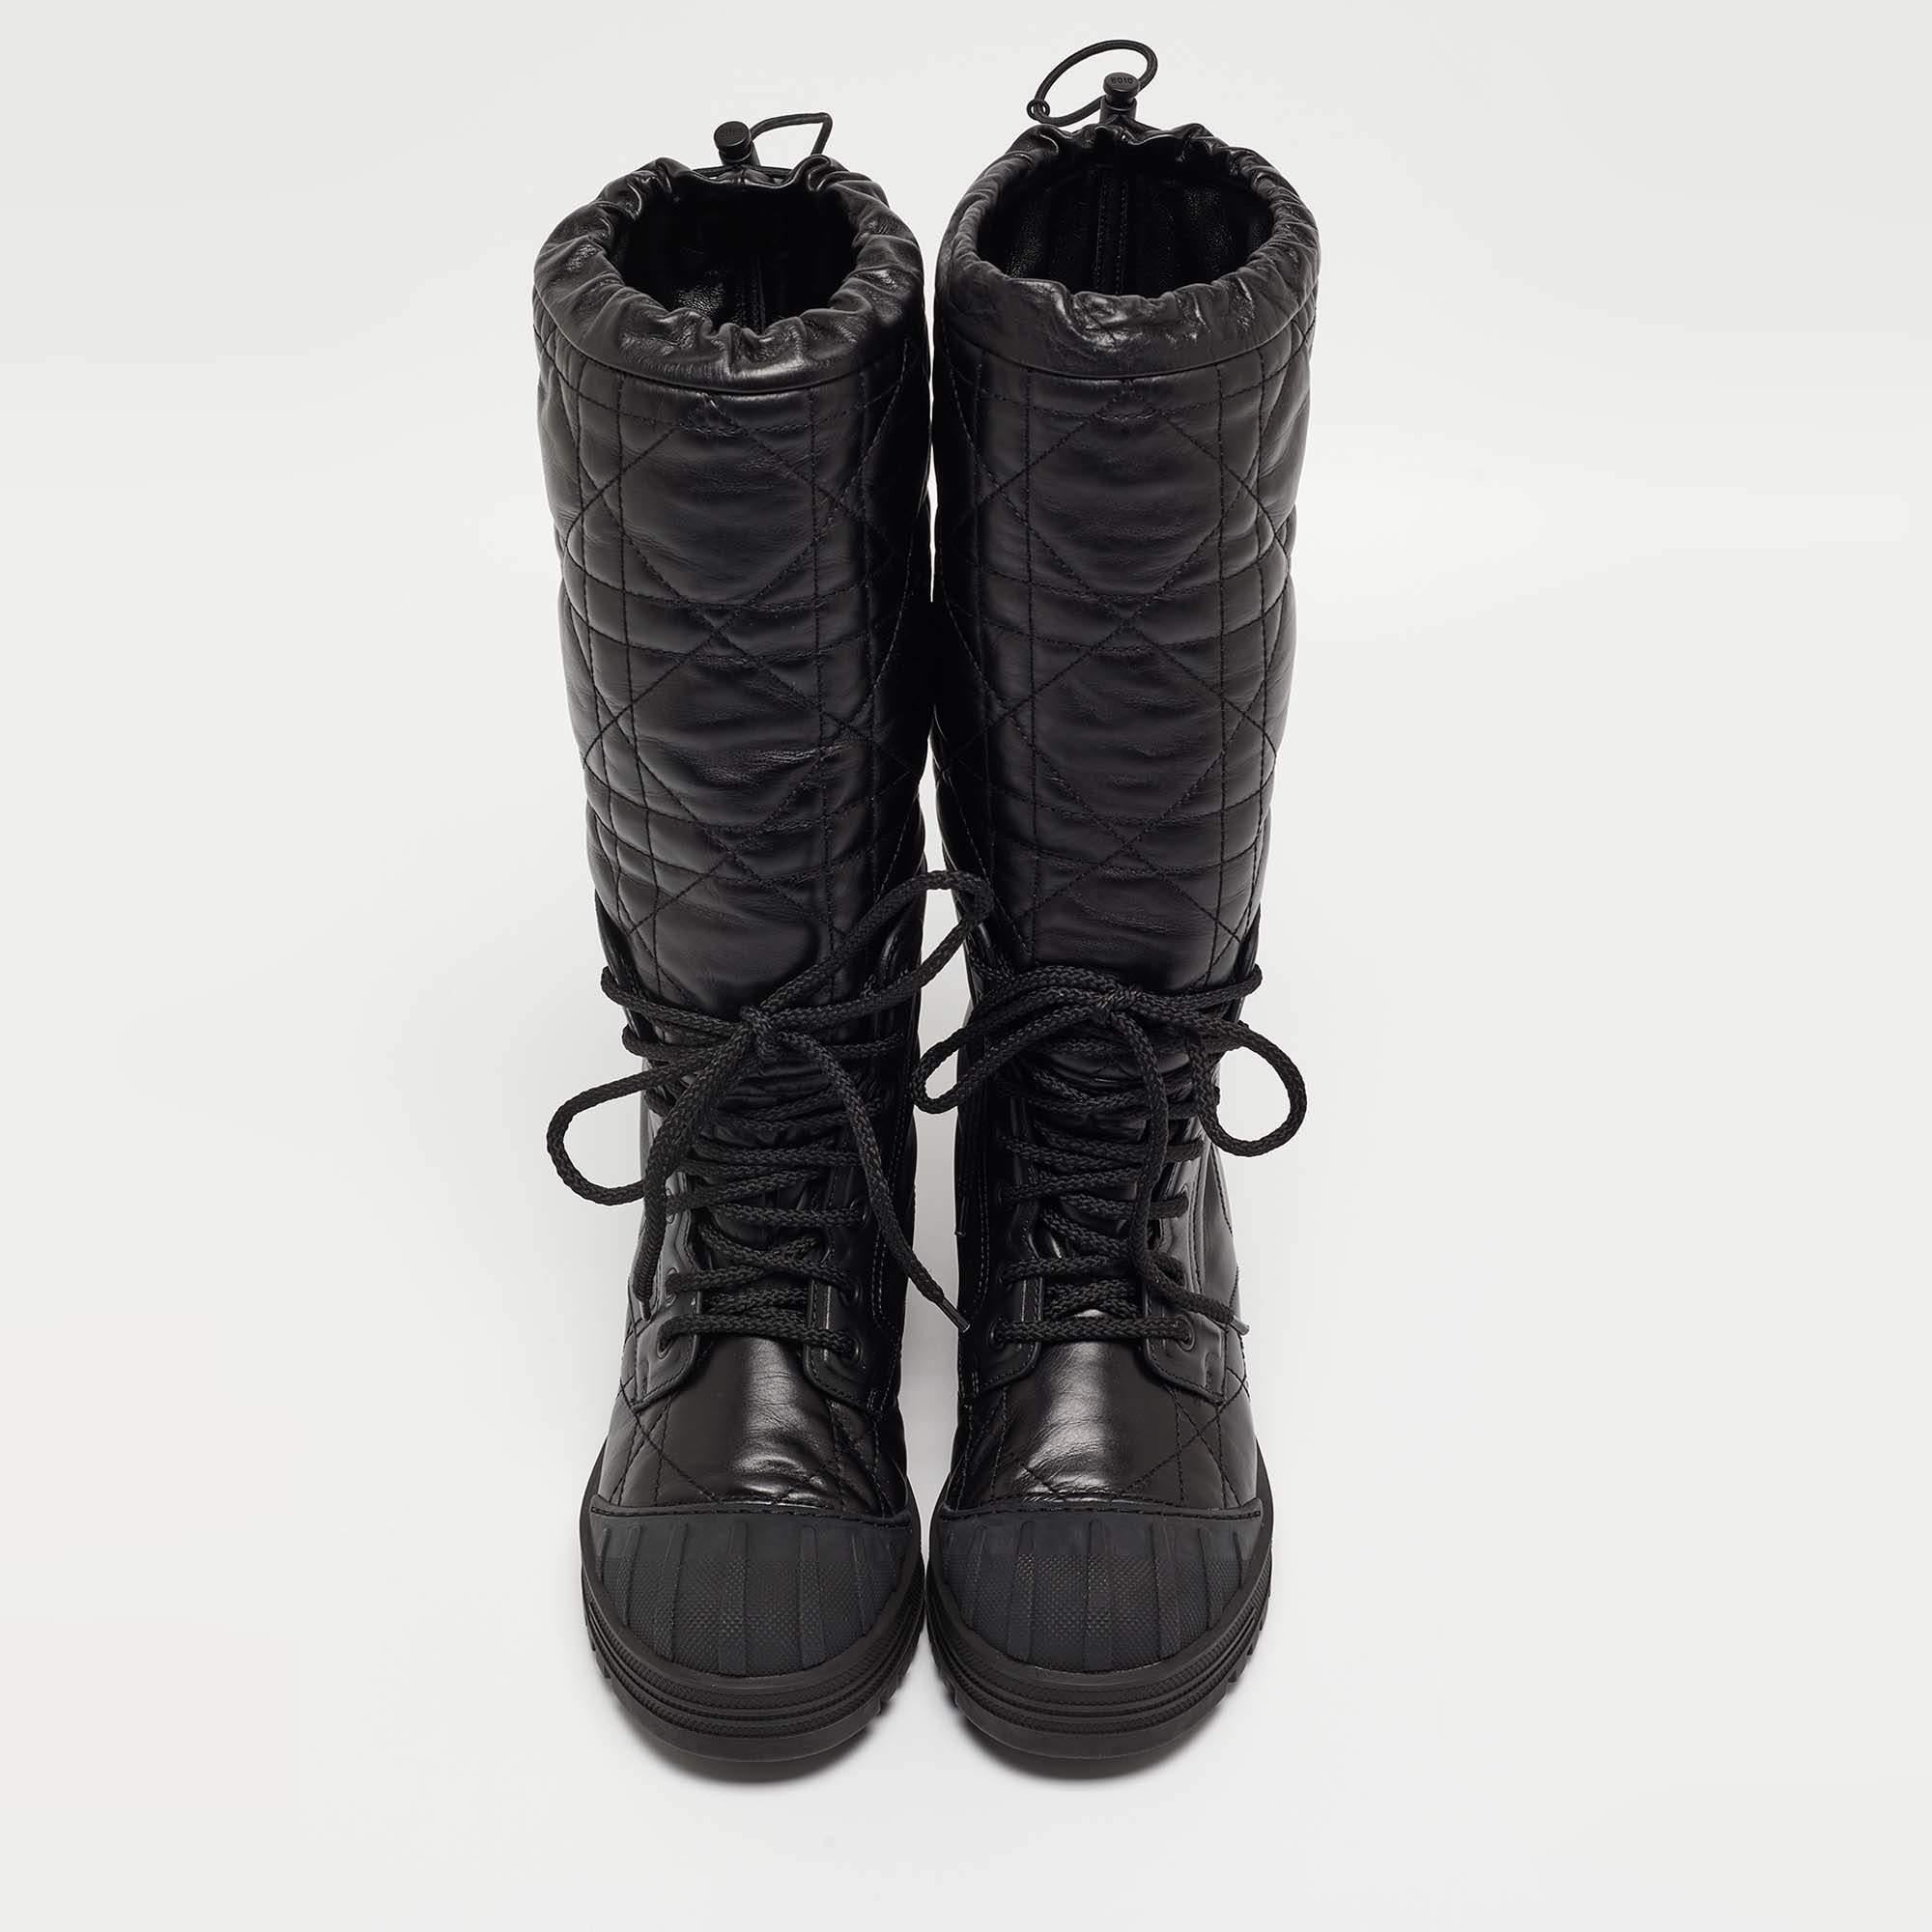 Elevate your style with these Dior combat boots for women. Crafted with precision, these chic and versatile boots blend fashion and comfort, offering sophistication for every season.

Includes: Original Dustbag, Original Box

